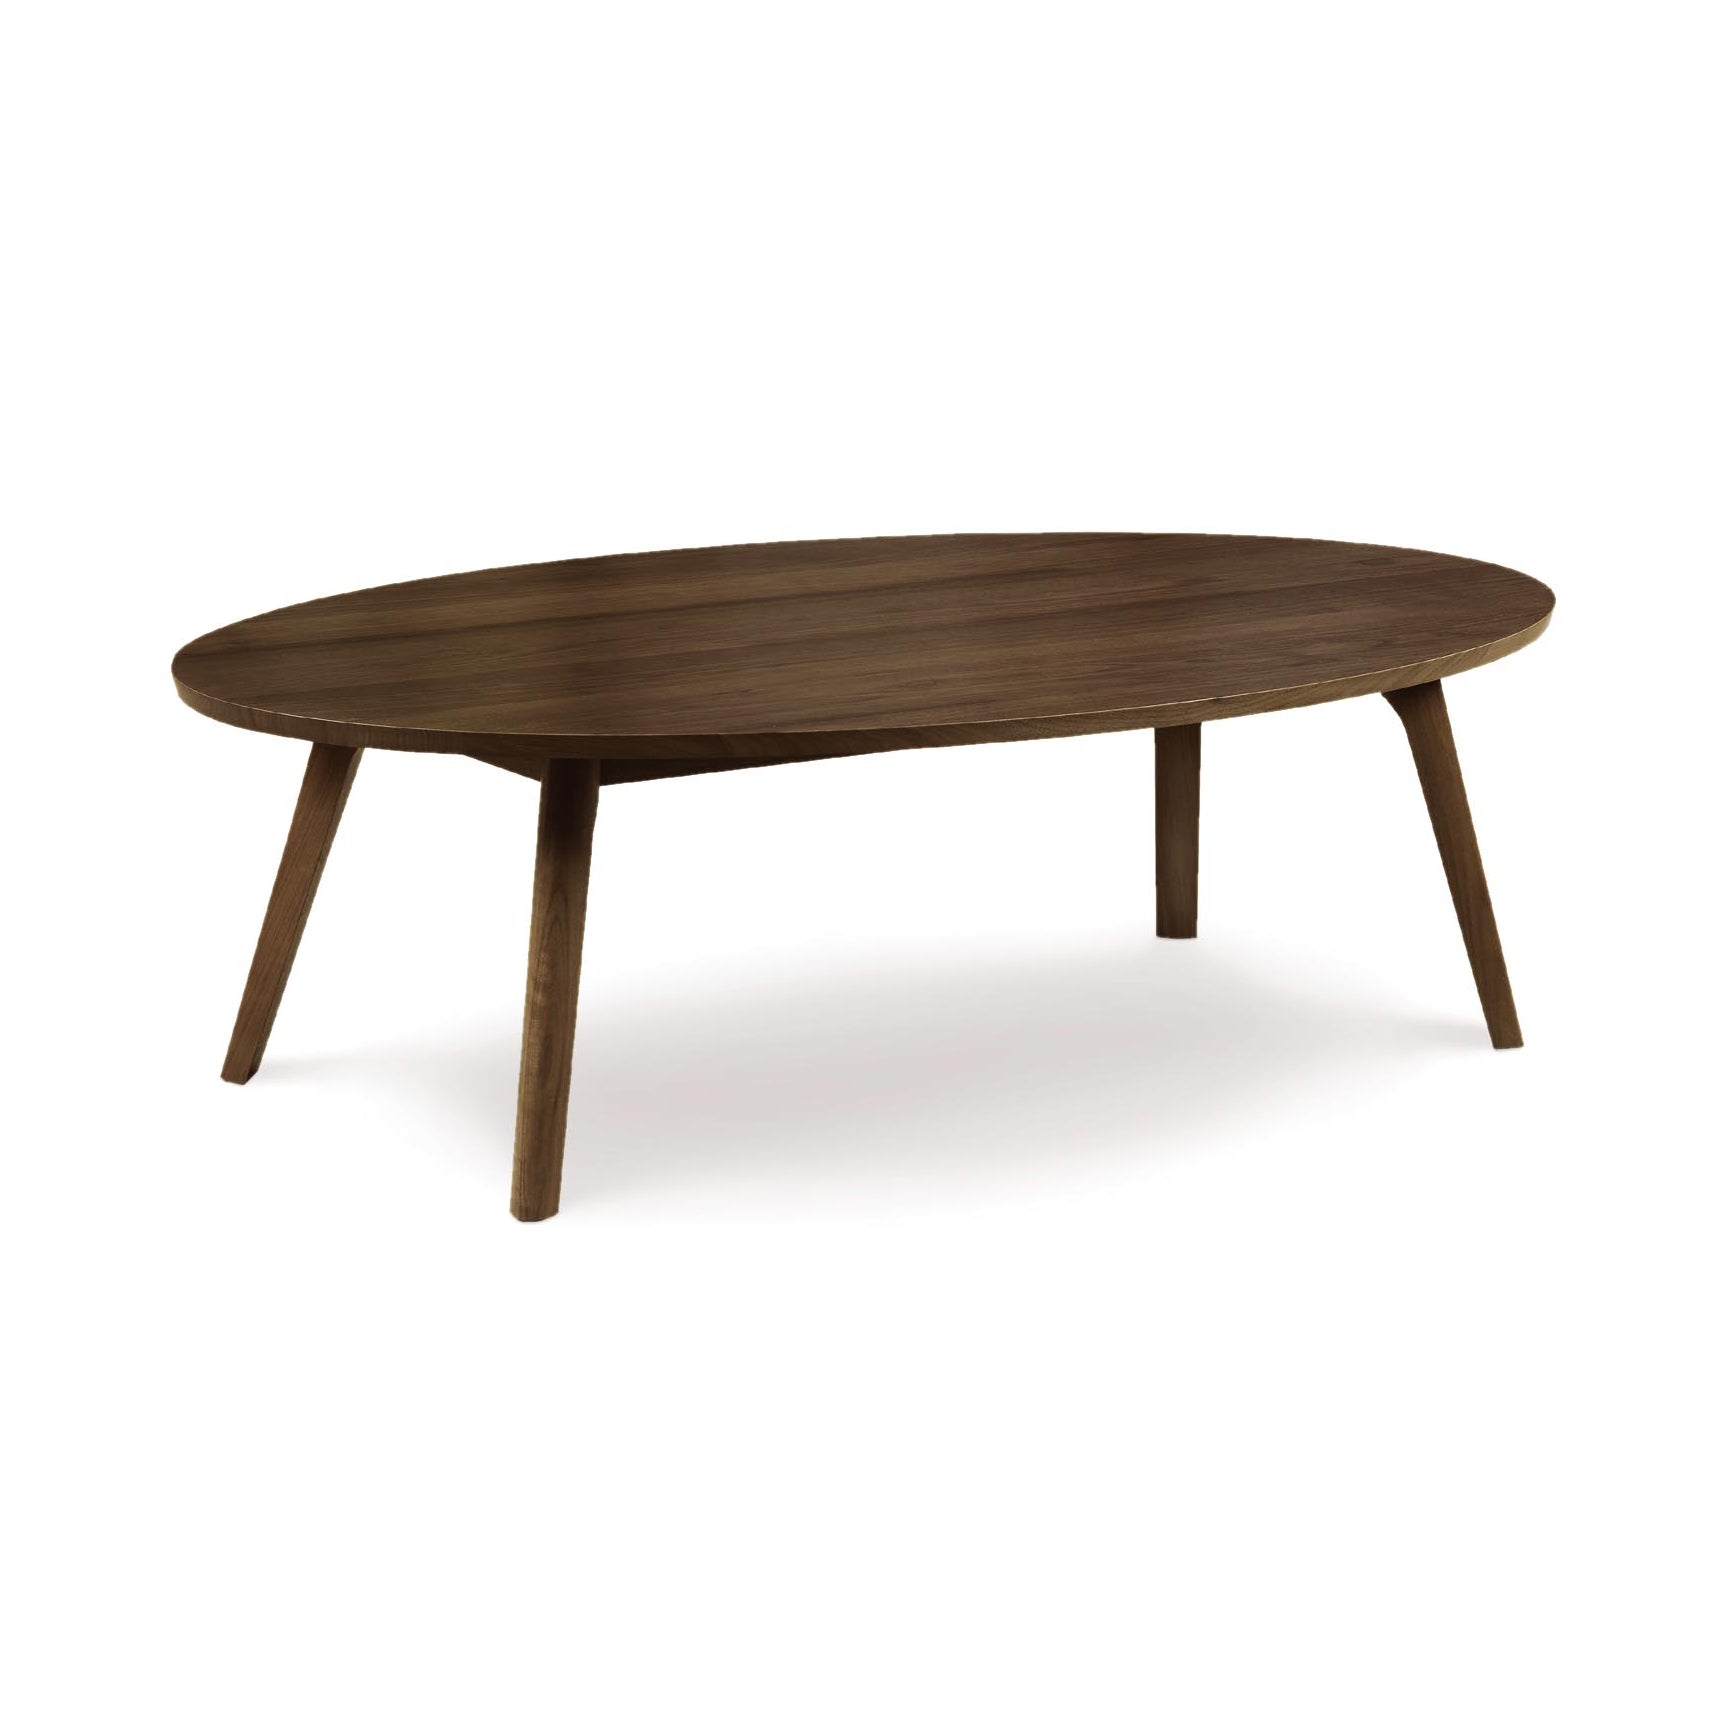 A Catalina Oval Coffee Table - Priority Ship, crafted from sustainable harvested hardwoods and manufactured by Copeland Furniture, featuring mid-century American styling with wooden legs.